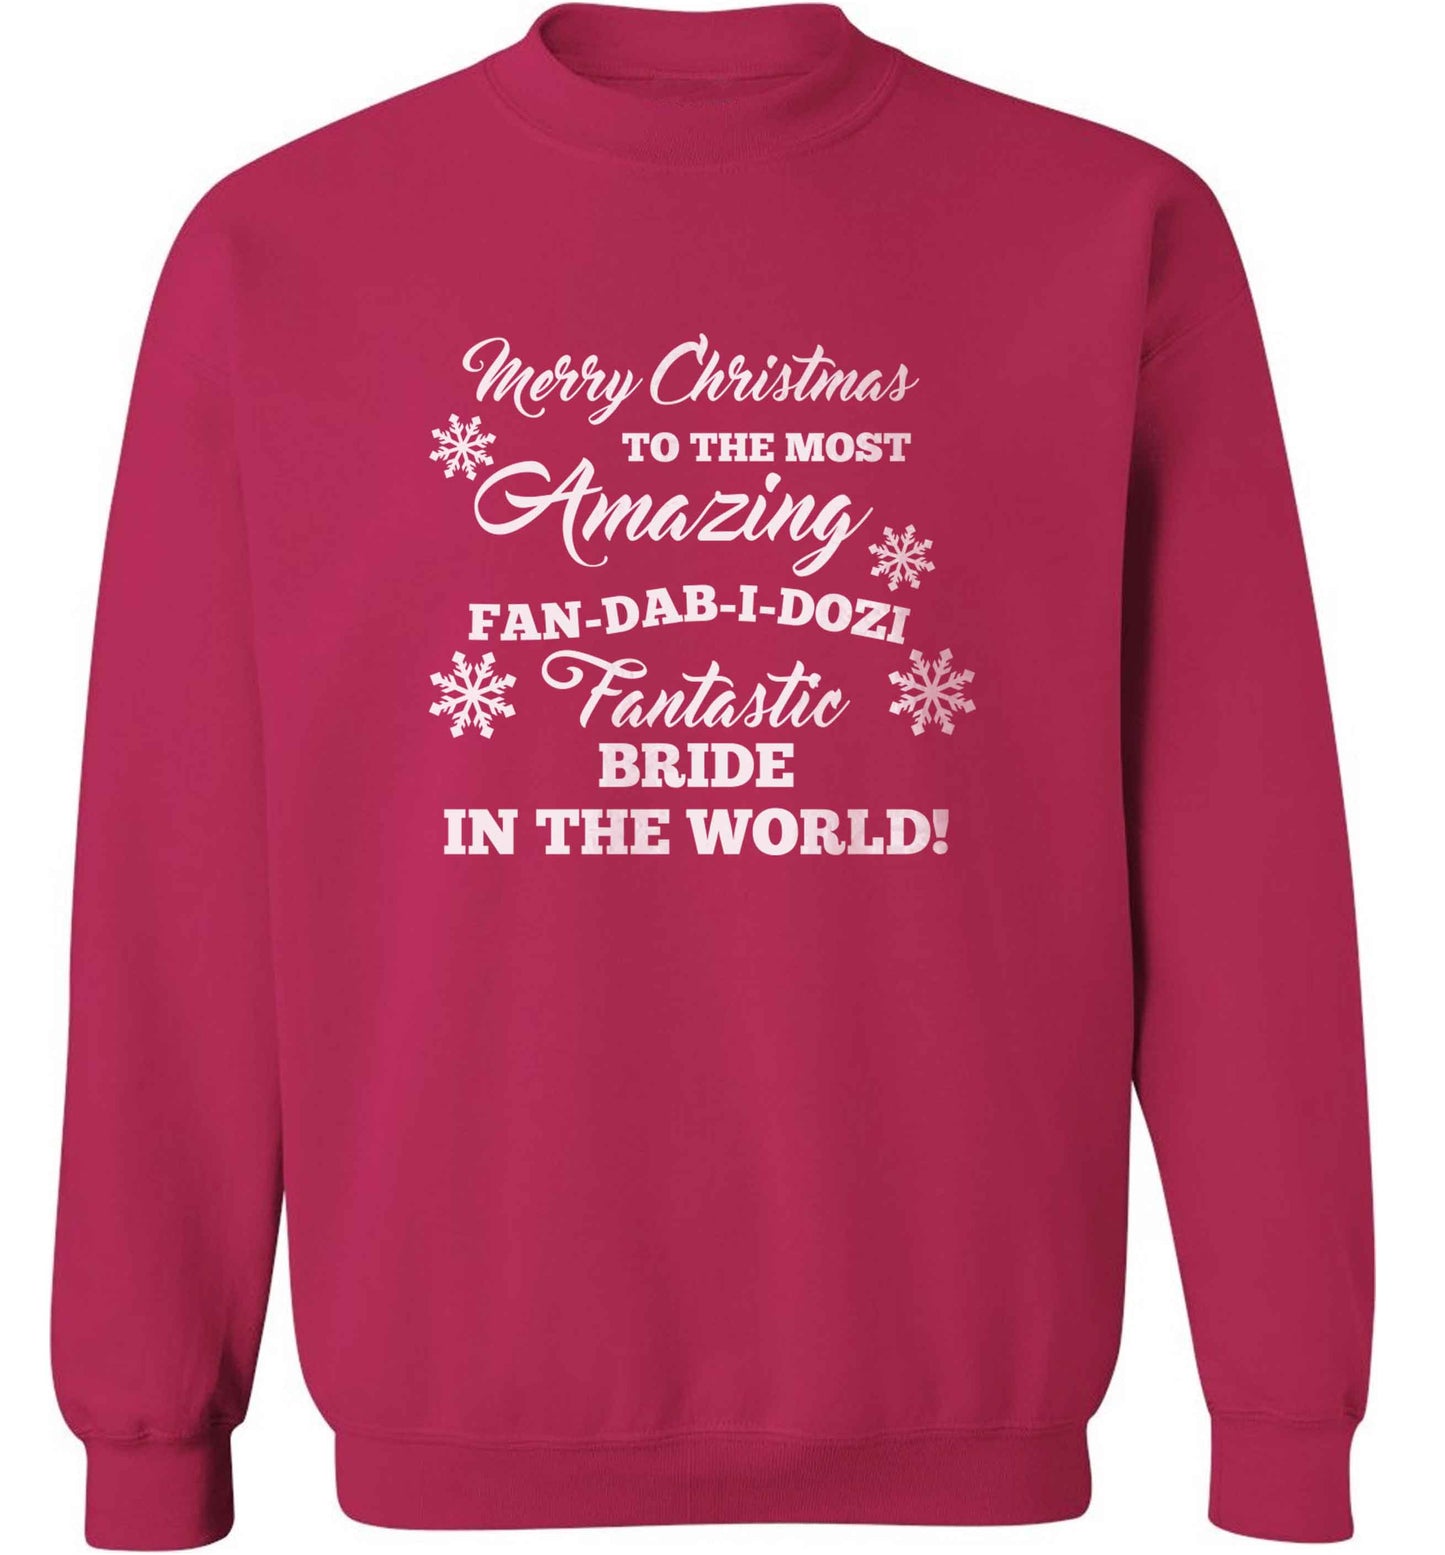 Merry Christmas to the most amazing bride in the world! adult's unisex pink sweater 2XL